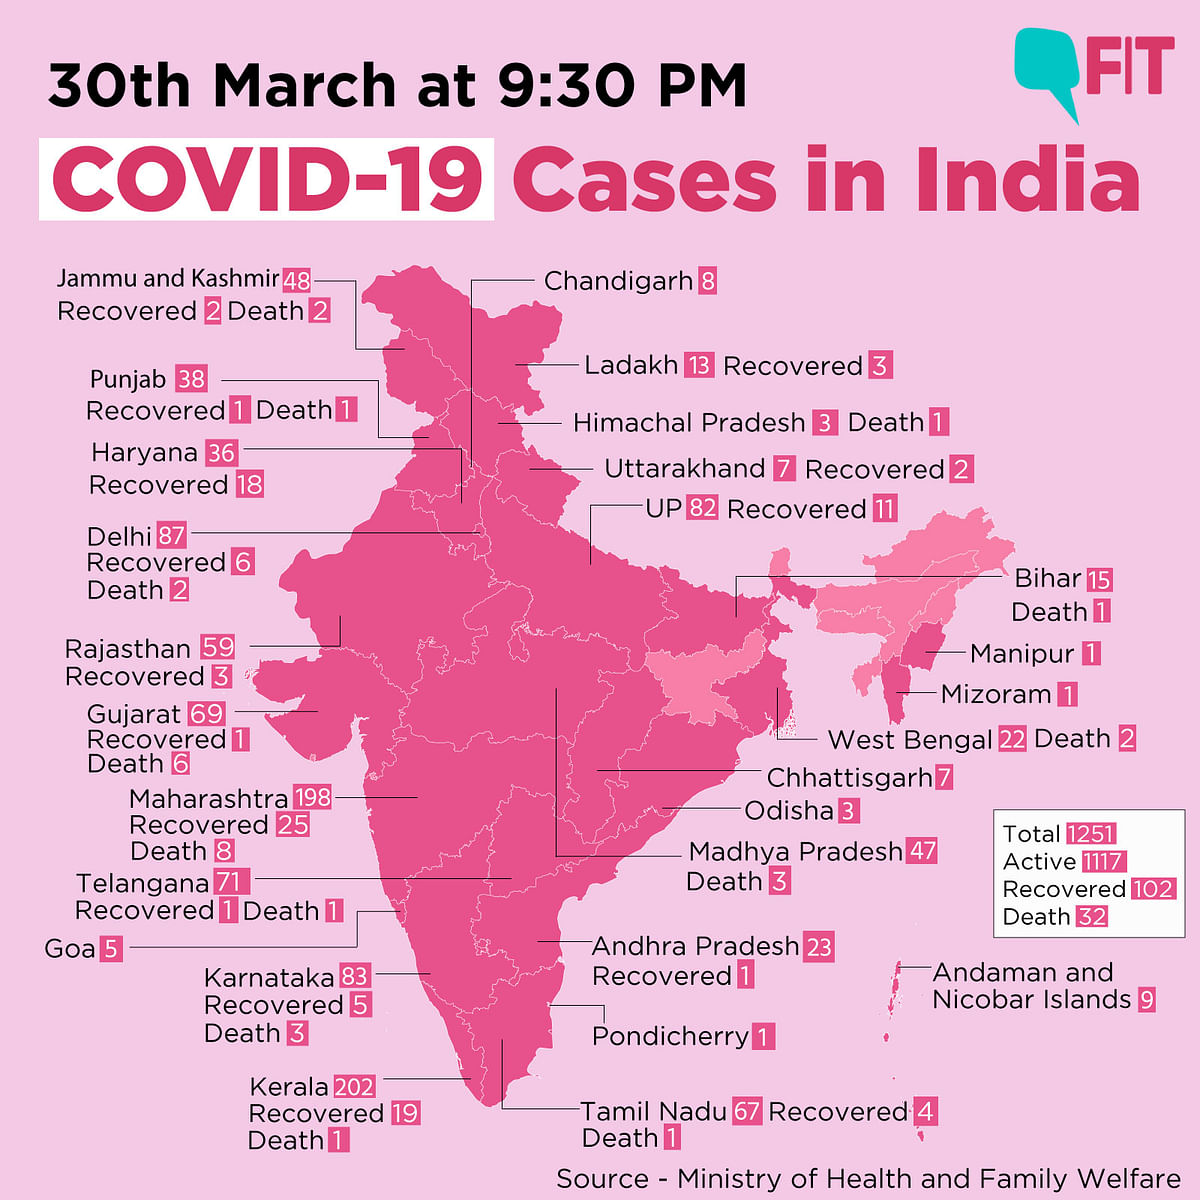 COVID-19 India Update: Cases Climb to 1251, Says Health Ministry